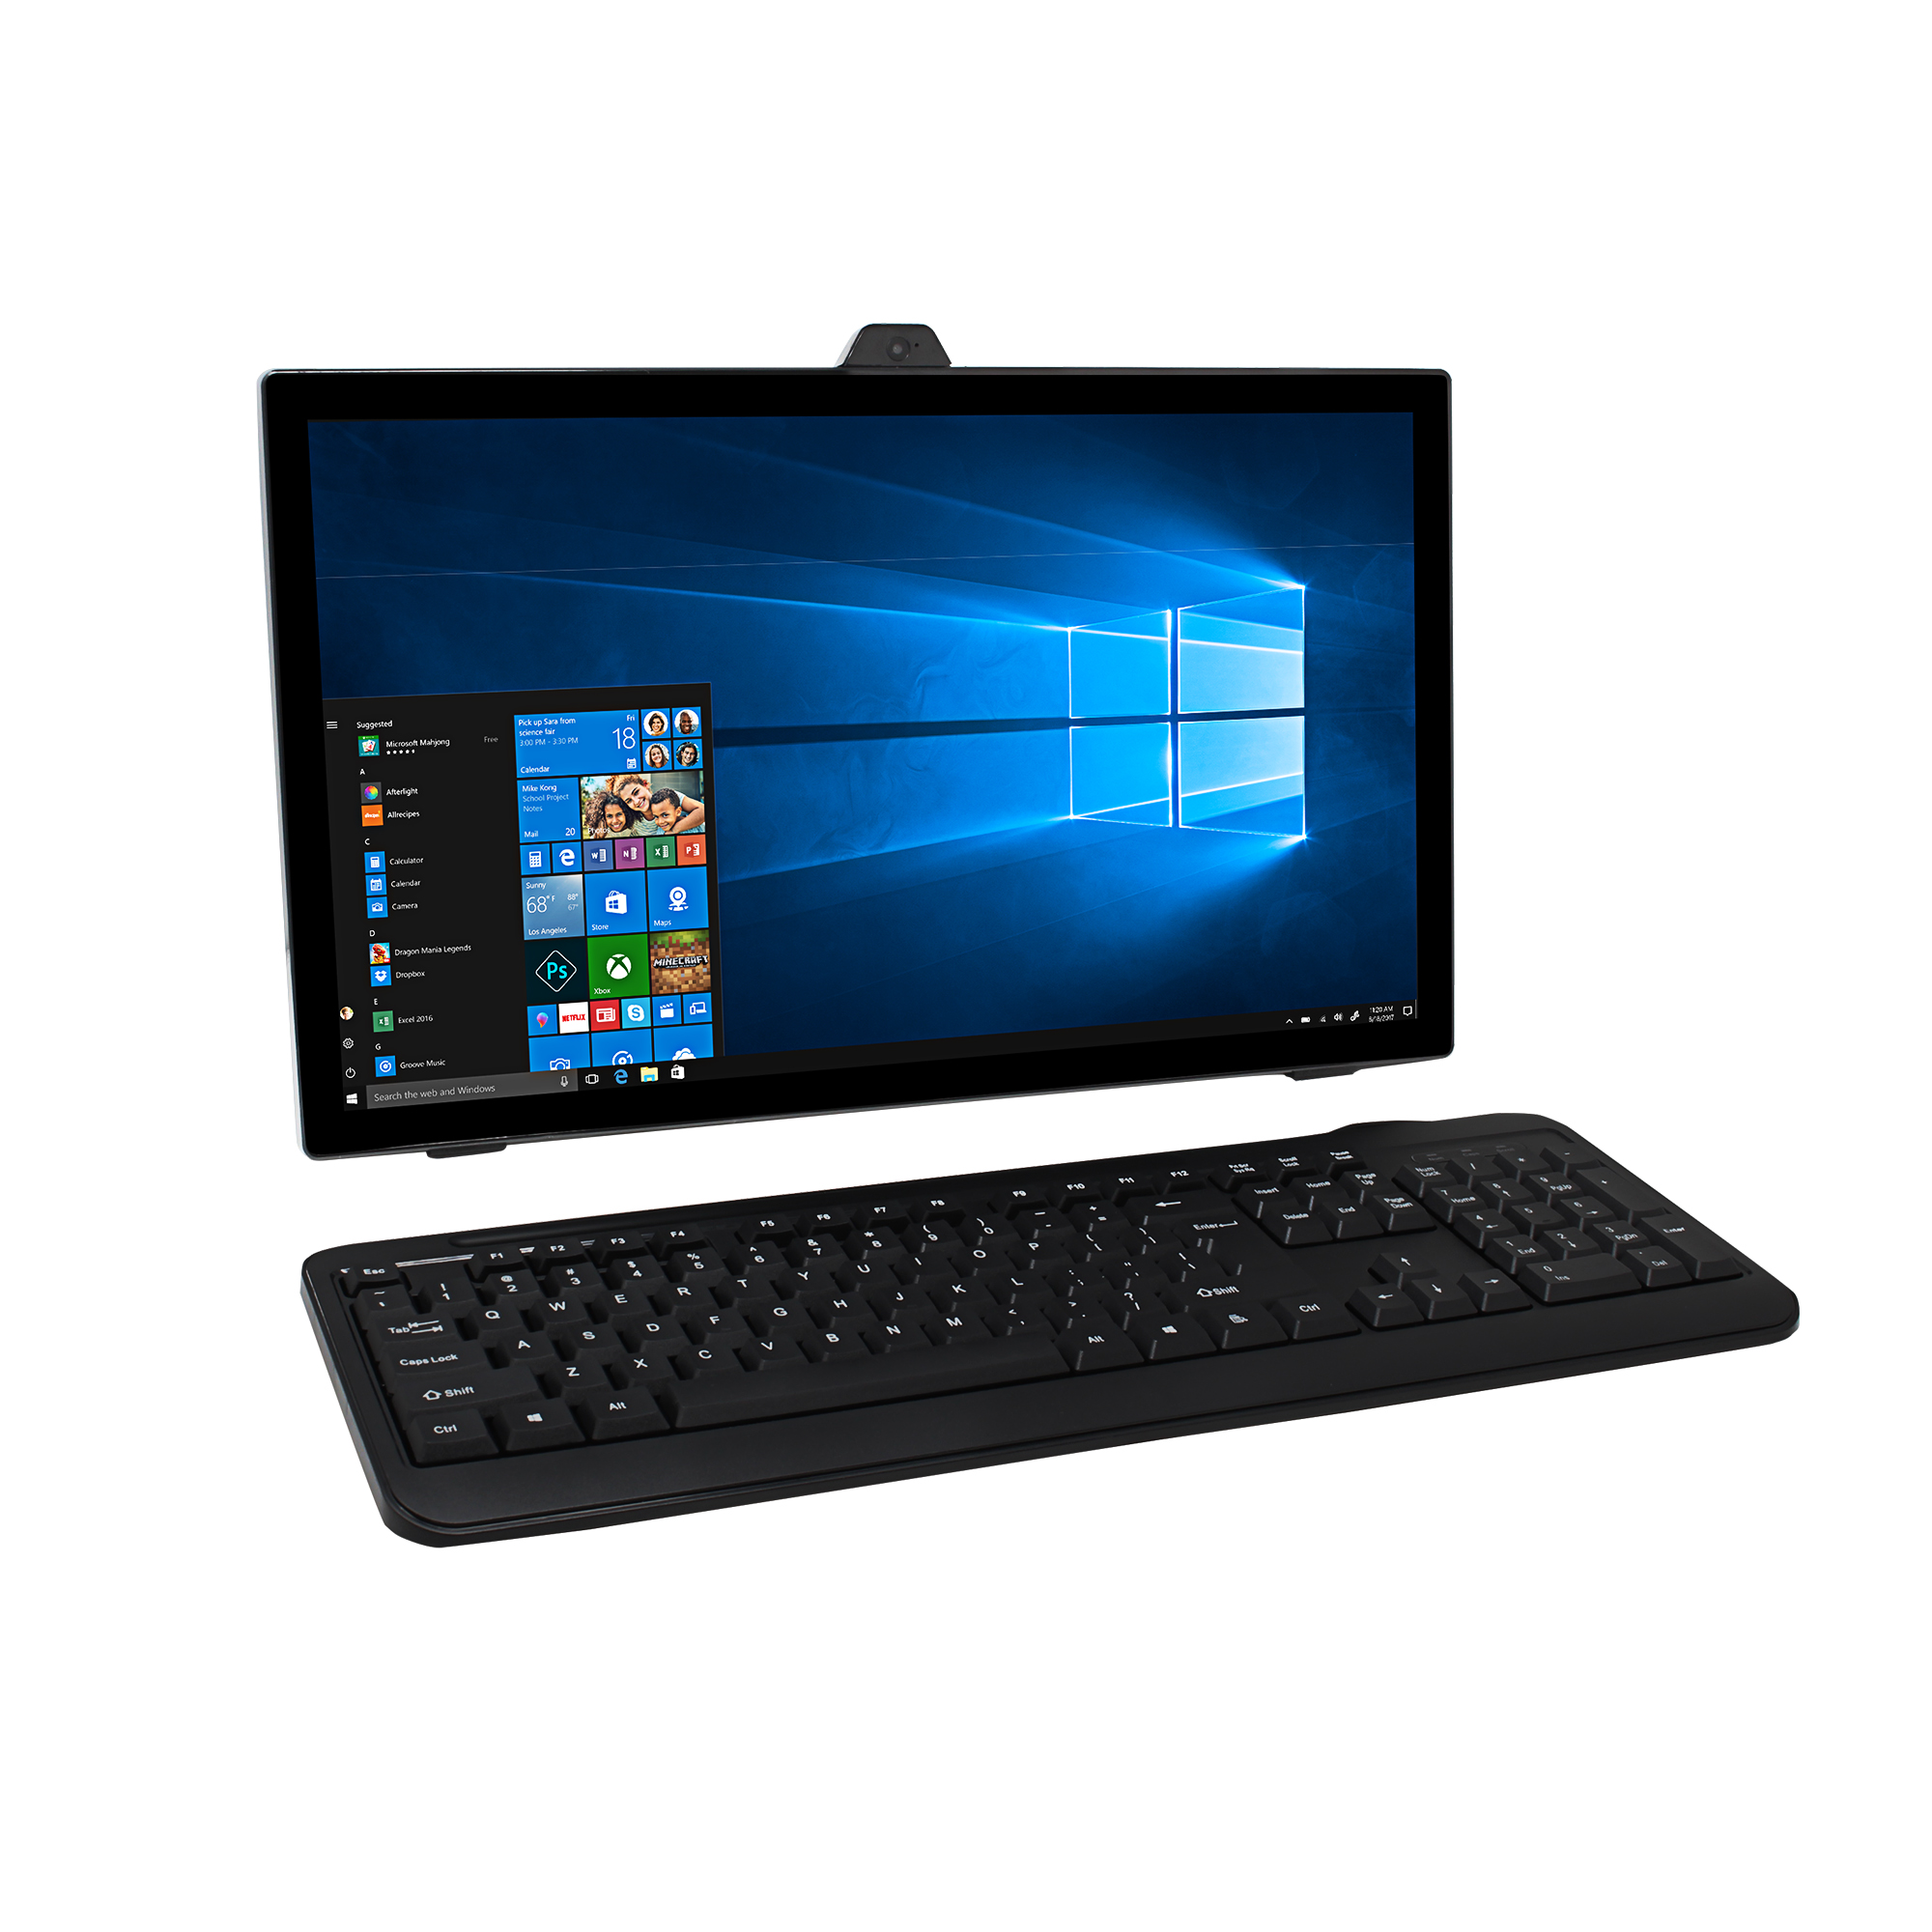 EVOO 18.5" All-in-One (AIO) Desktop with Wired Keyboard and Mouse, Quad Core, 2GB Memory, 32GB Storage, HDMI, Webcam, Windows 10 Home, Black - image 3 of 4